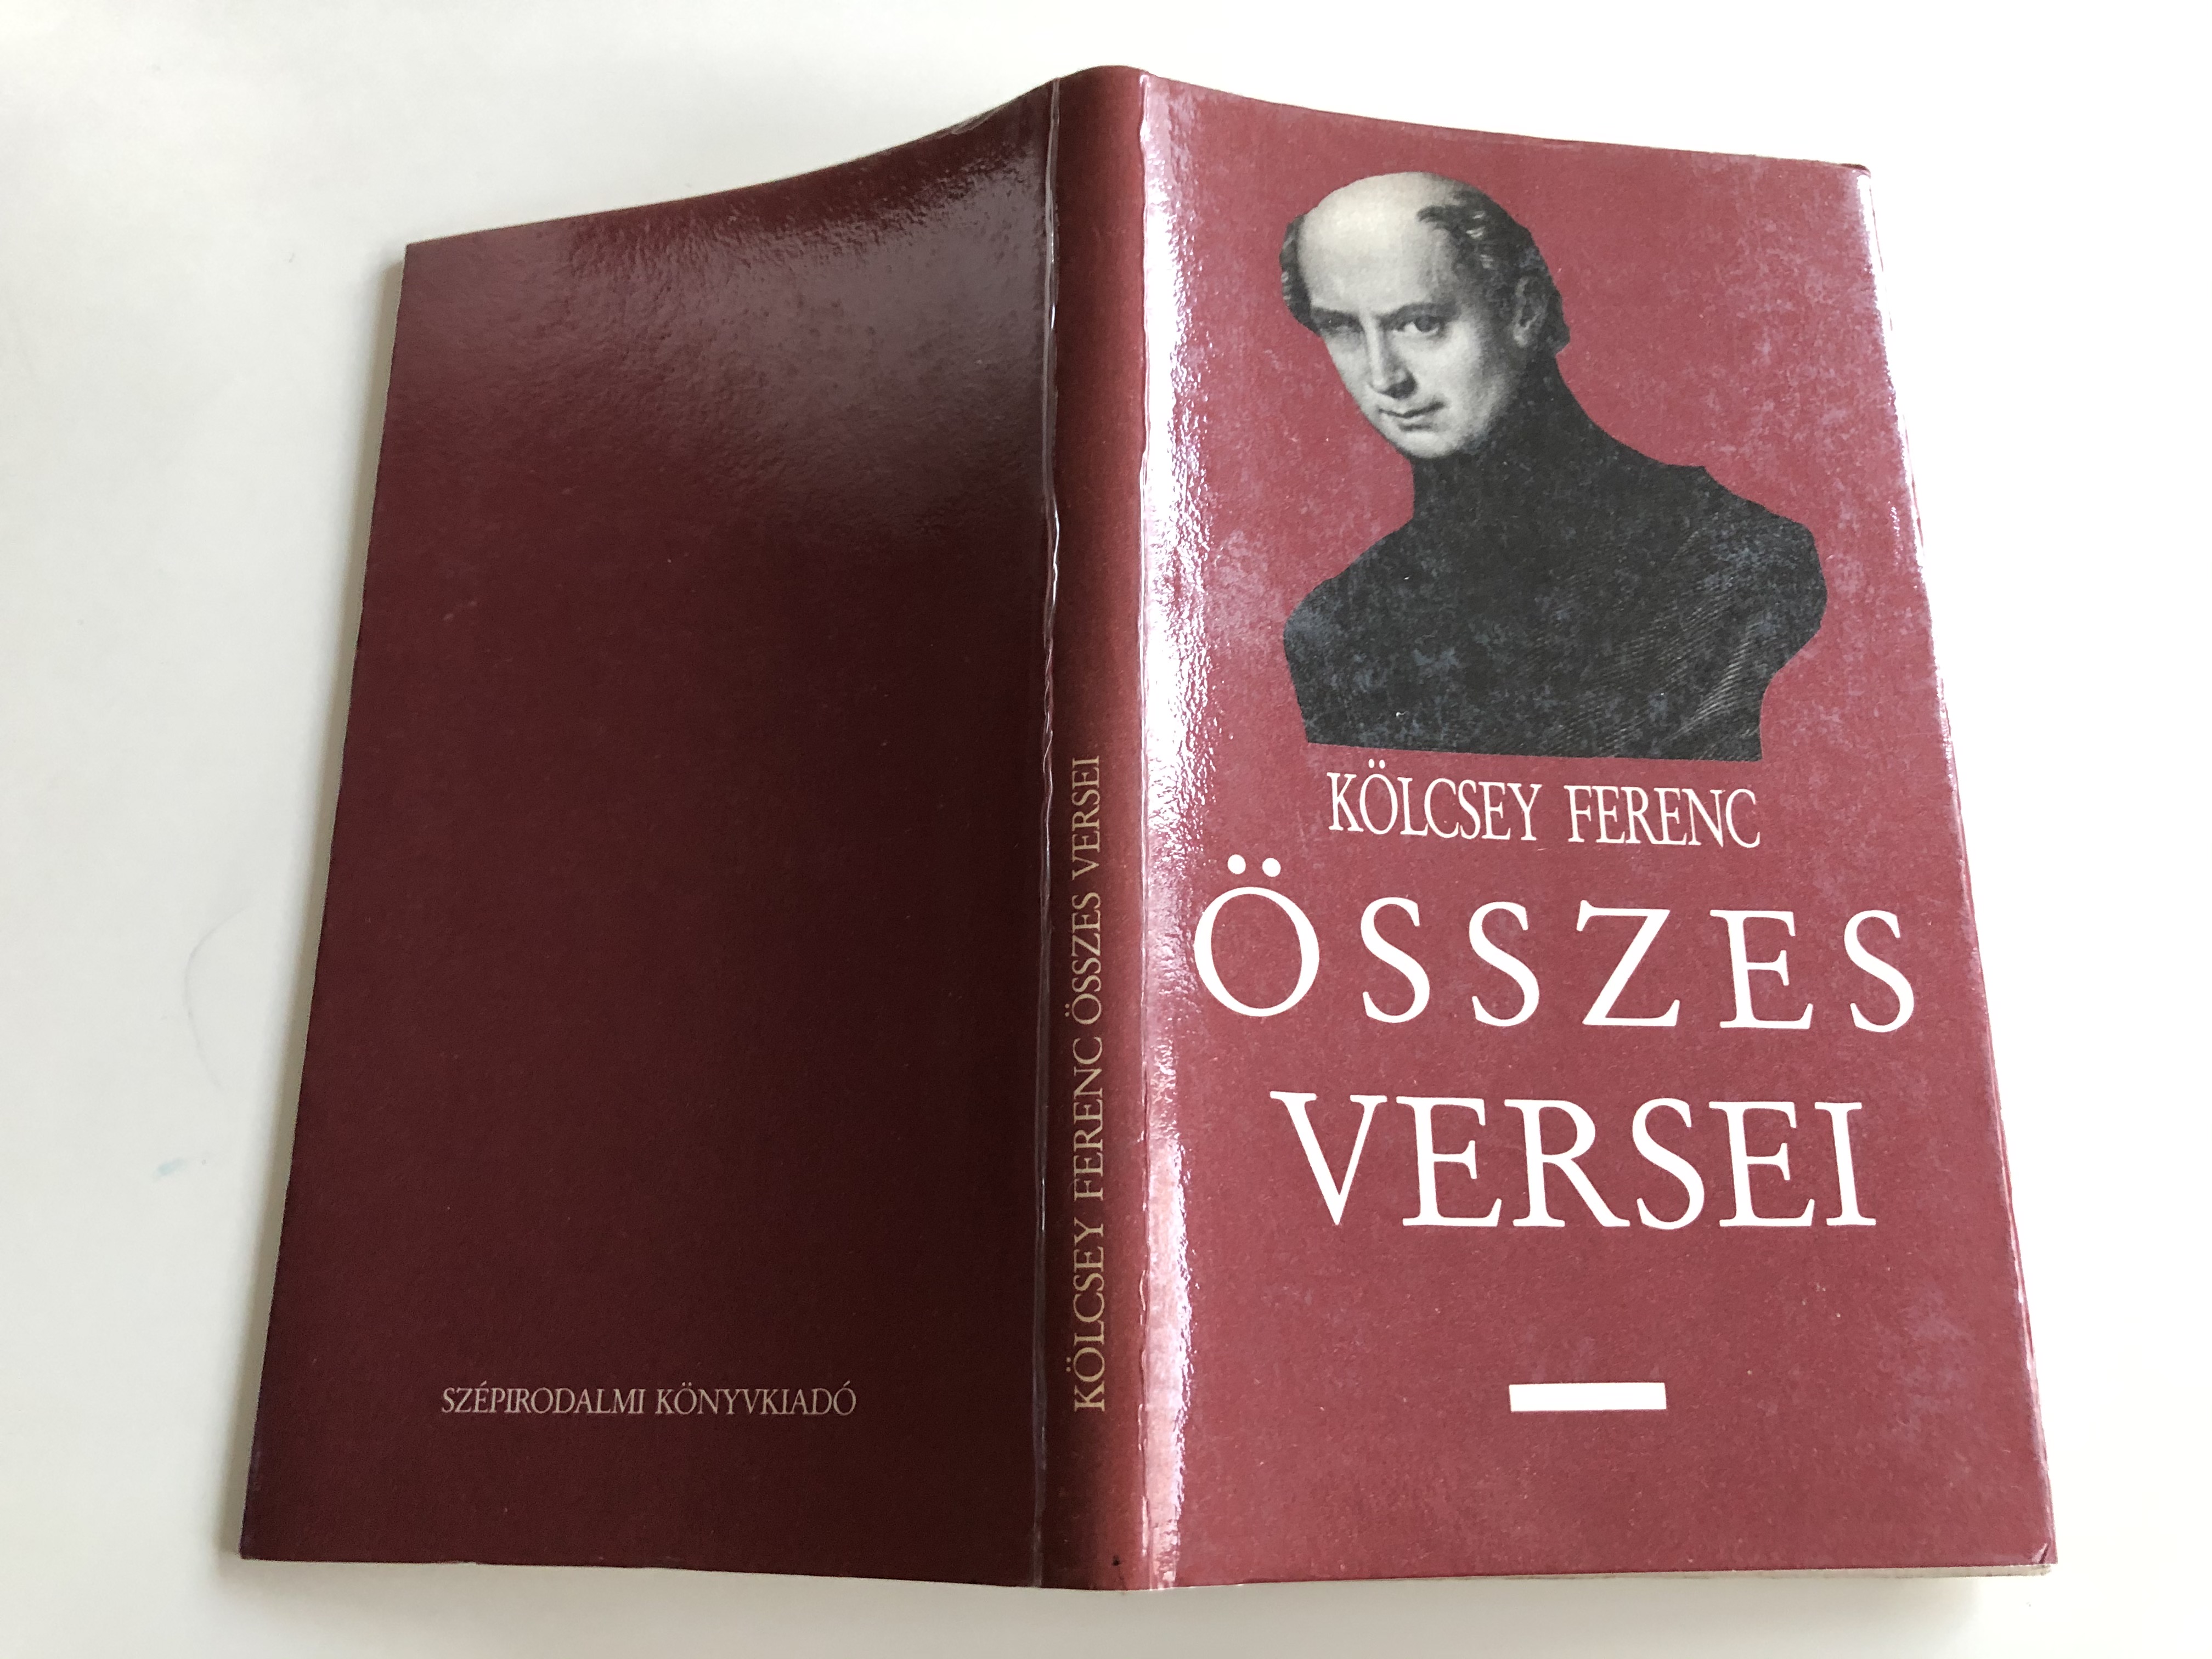 k-lcsey-ferenc-sszes-versei-all-poems-of-ferenc-k-lcsey-16.jpg